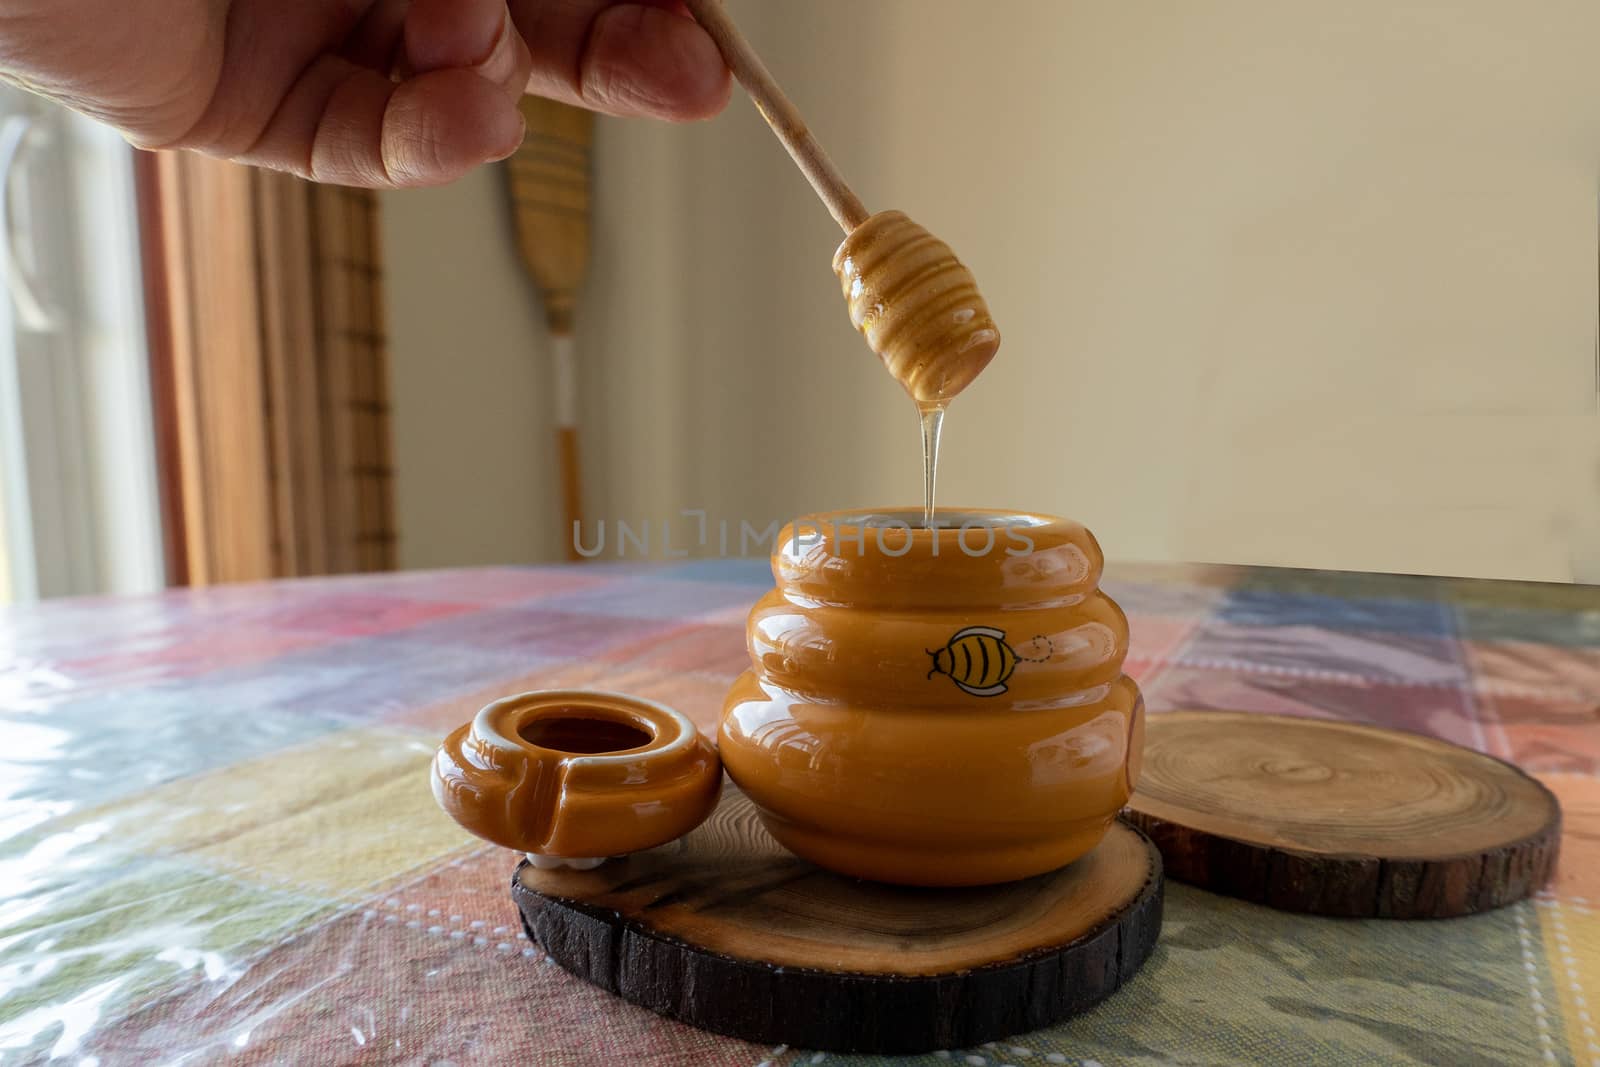 Ceramic yellow jar with linden honey stands on the table